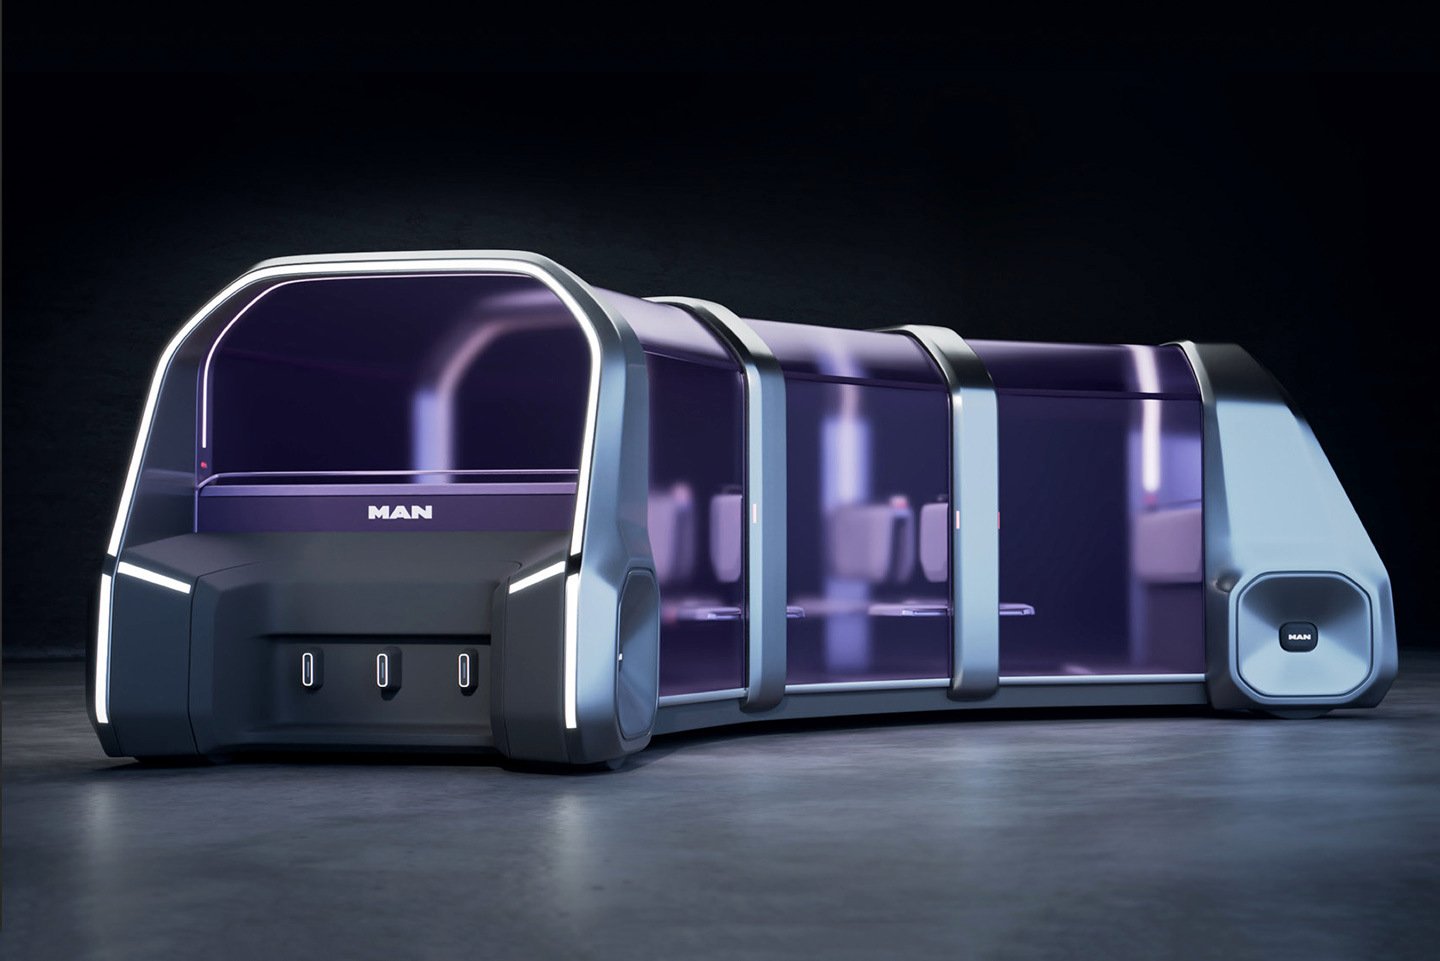 #This futuristic modular EV can carry everything from passengers to cargo